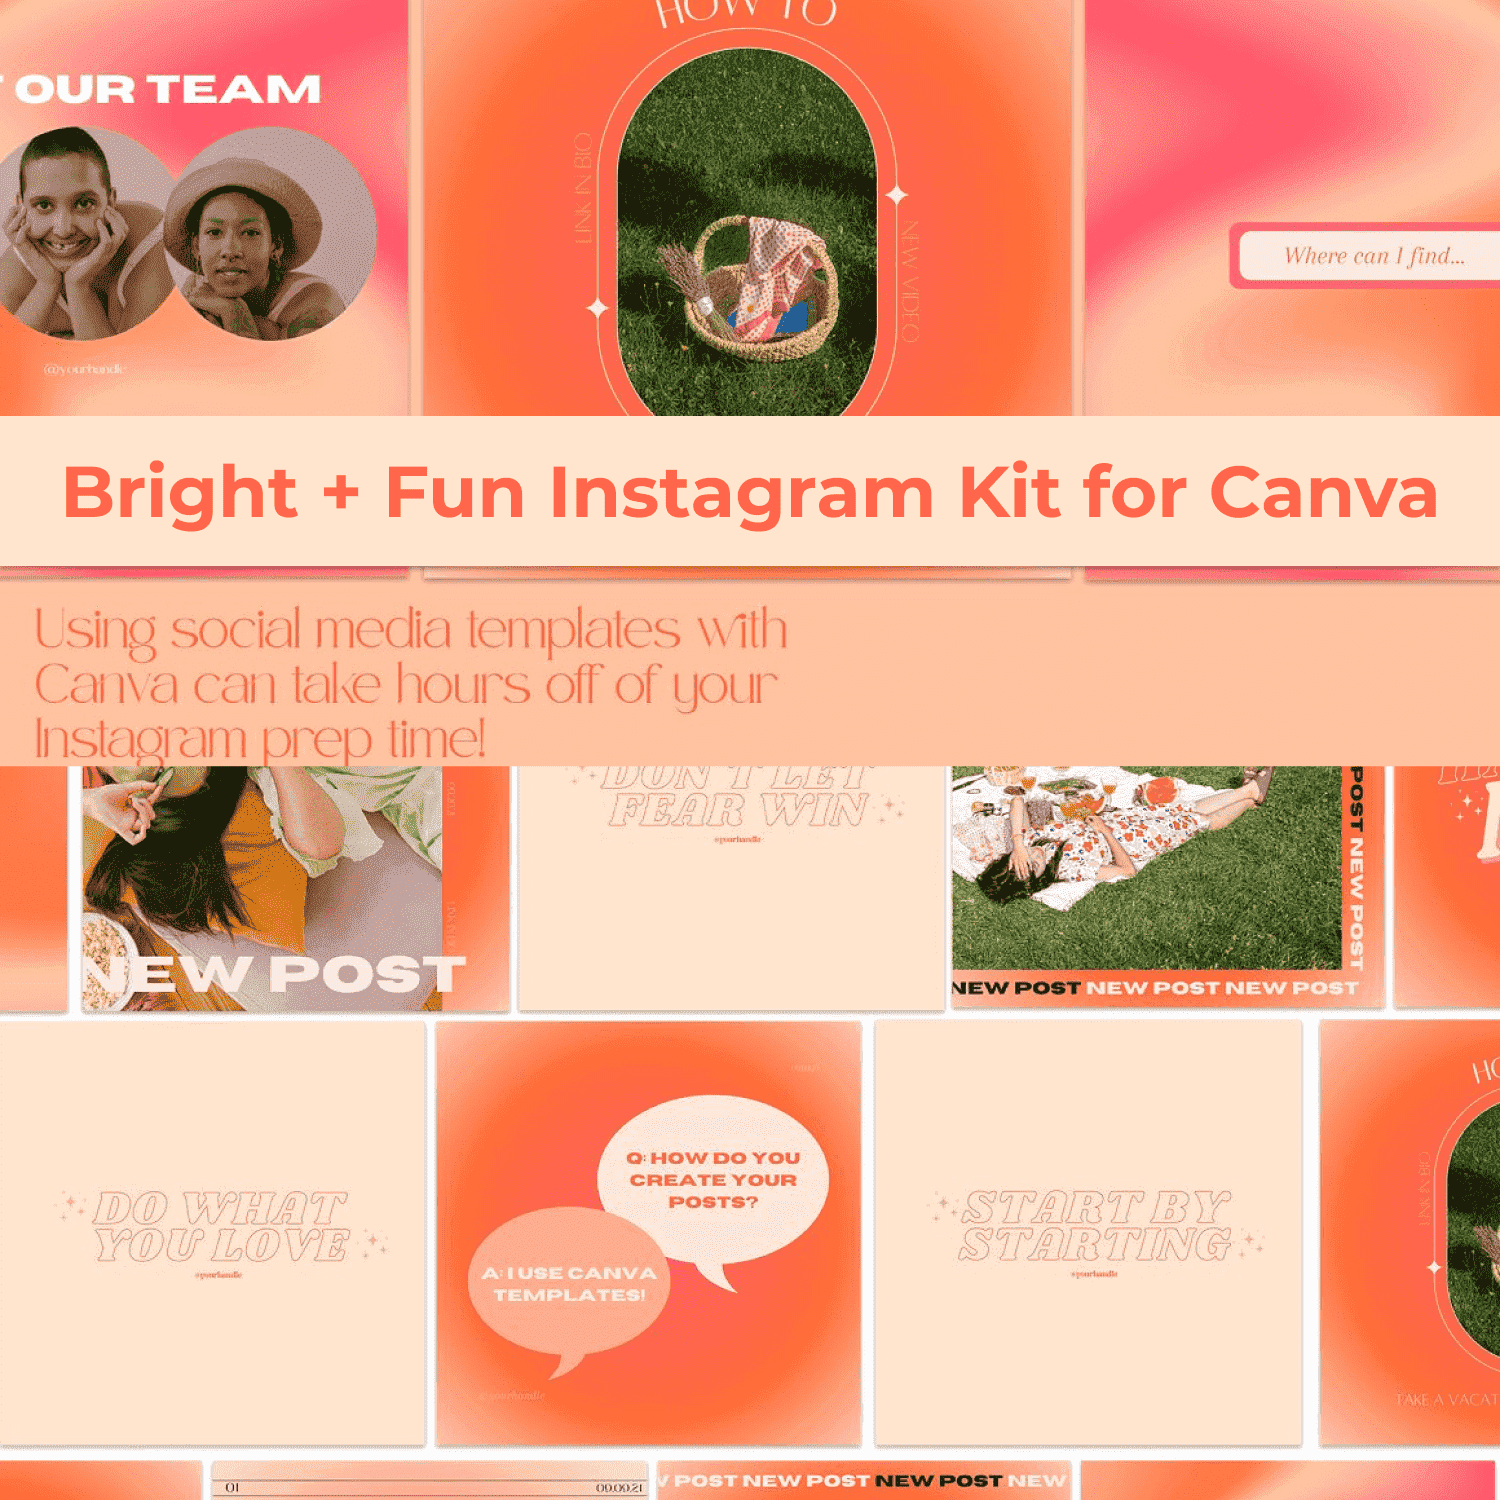 Bright + Fun Instagram Kit For Canva -"Using Social Media Templates With Canva Can Take Hours Off Your Instagram Prep Time".